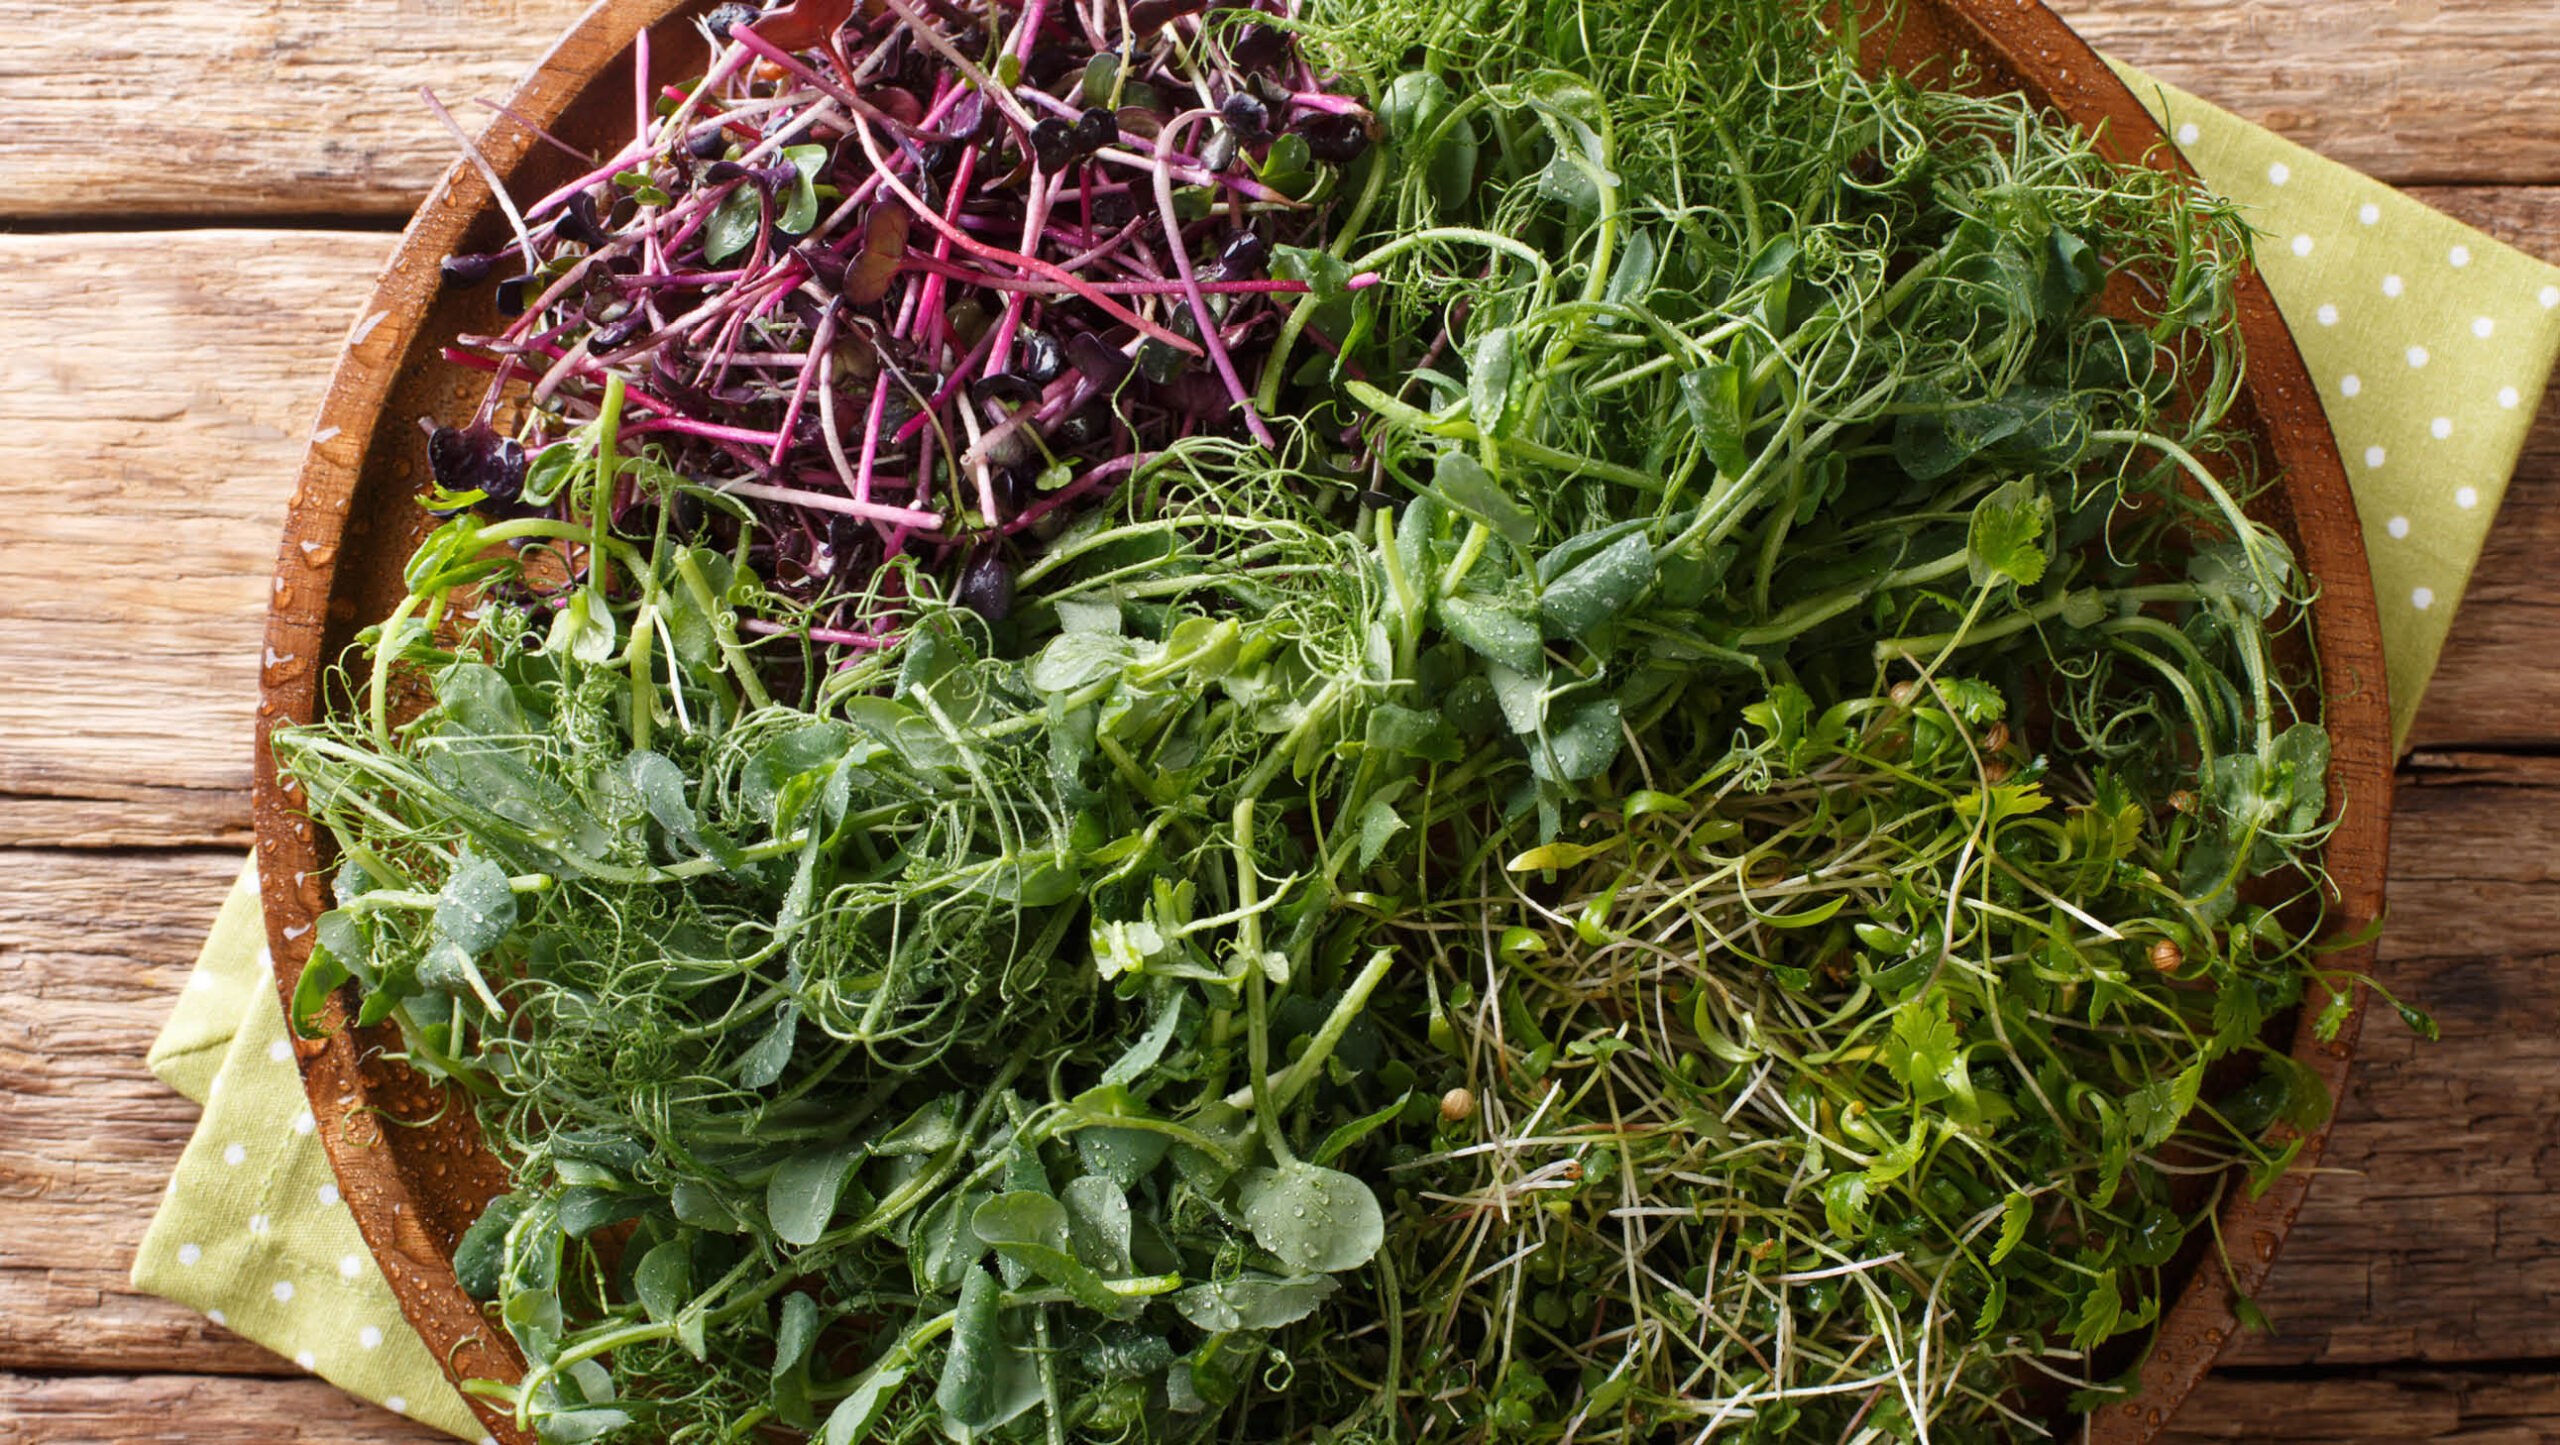 Microgreens may be small but they are filled with vitamins.